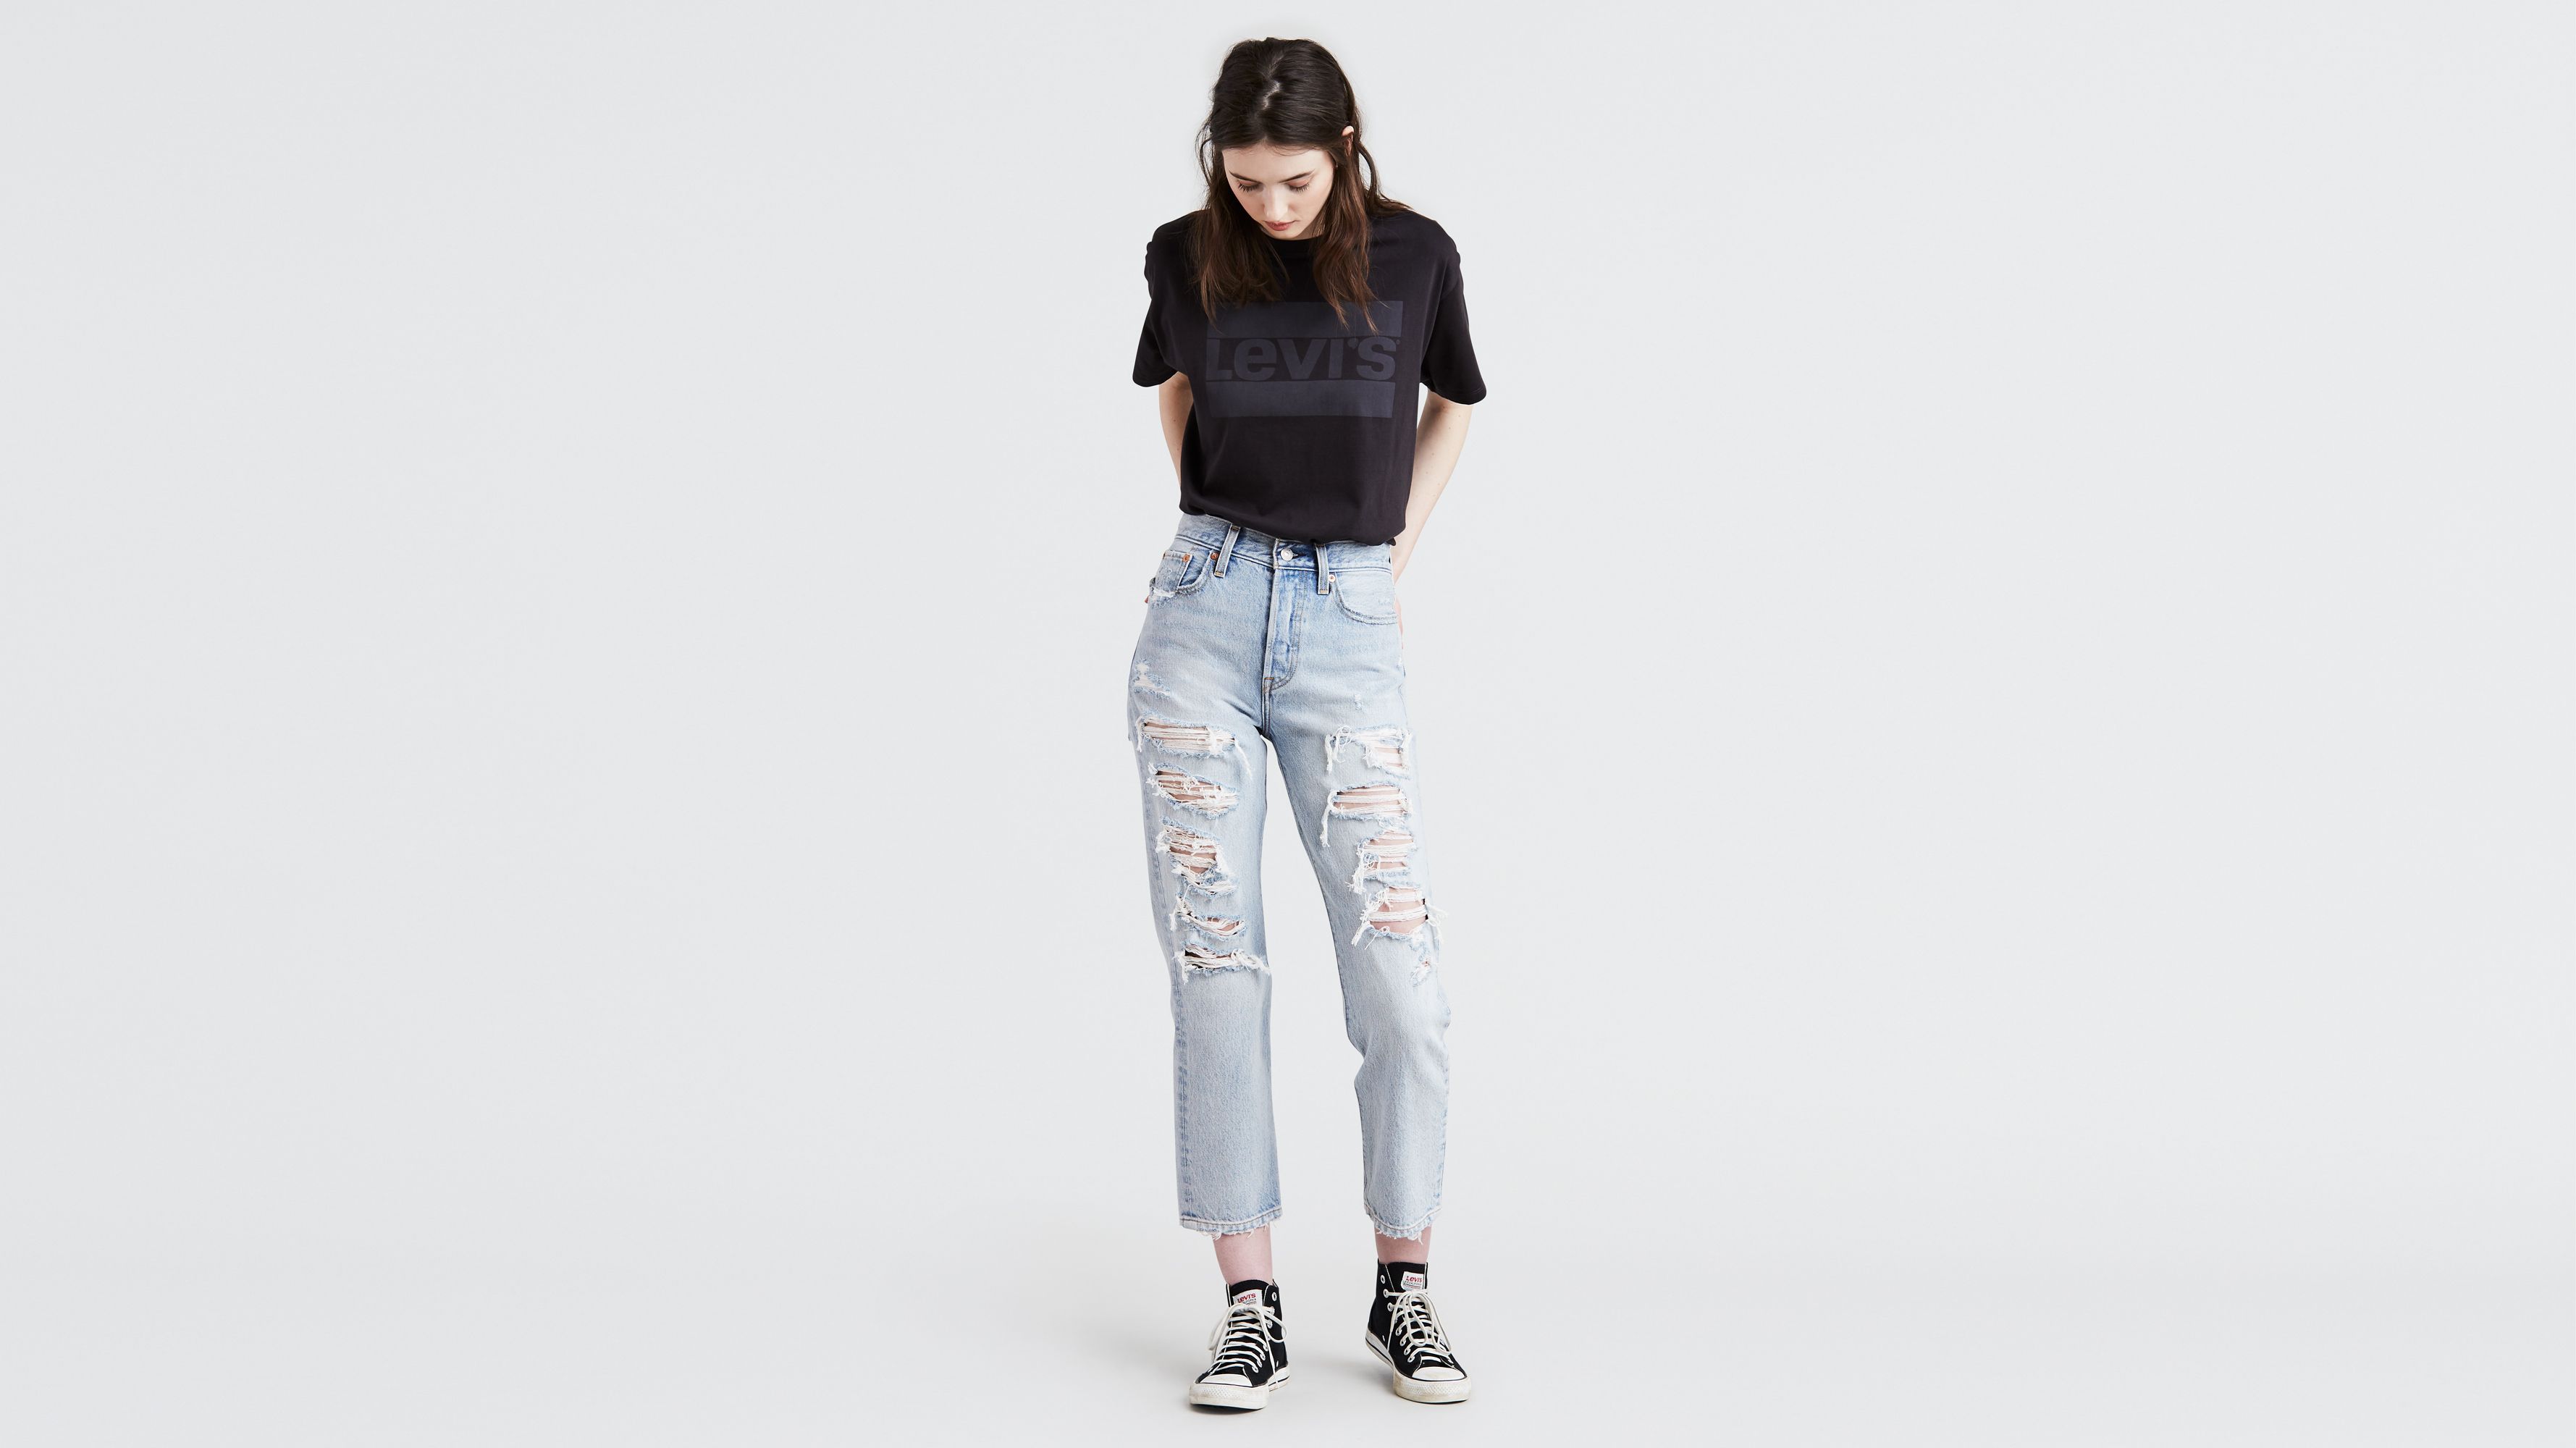 levi's wedgie ripped jeans